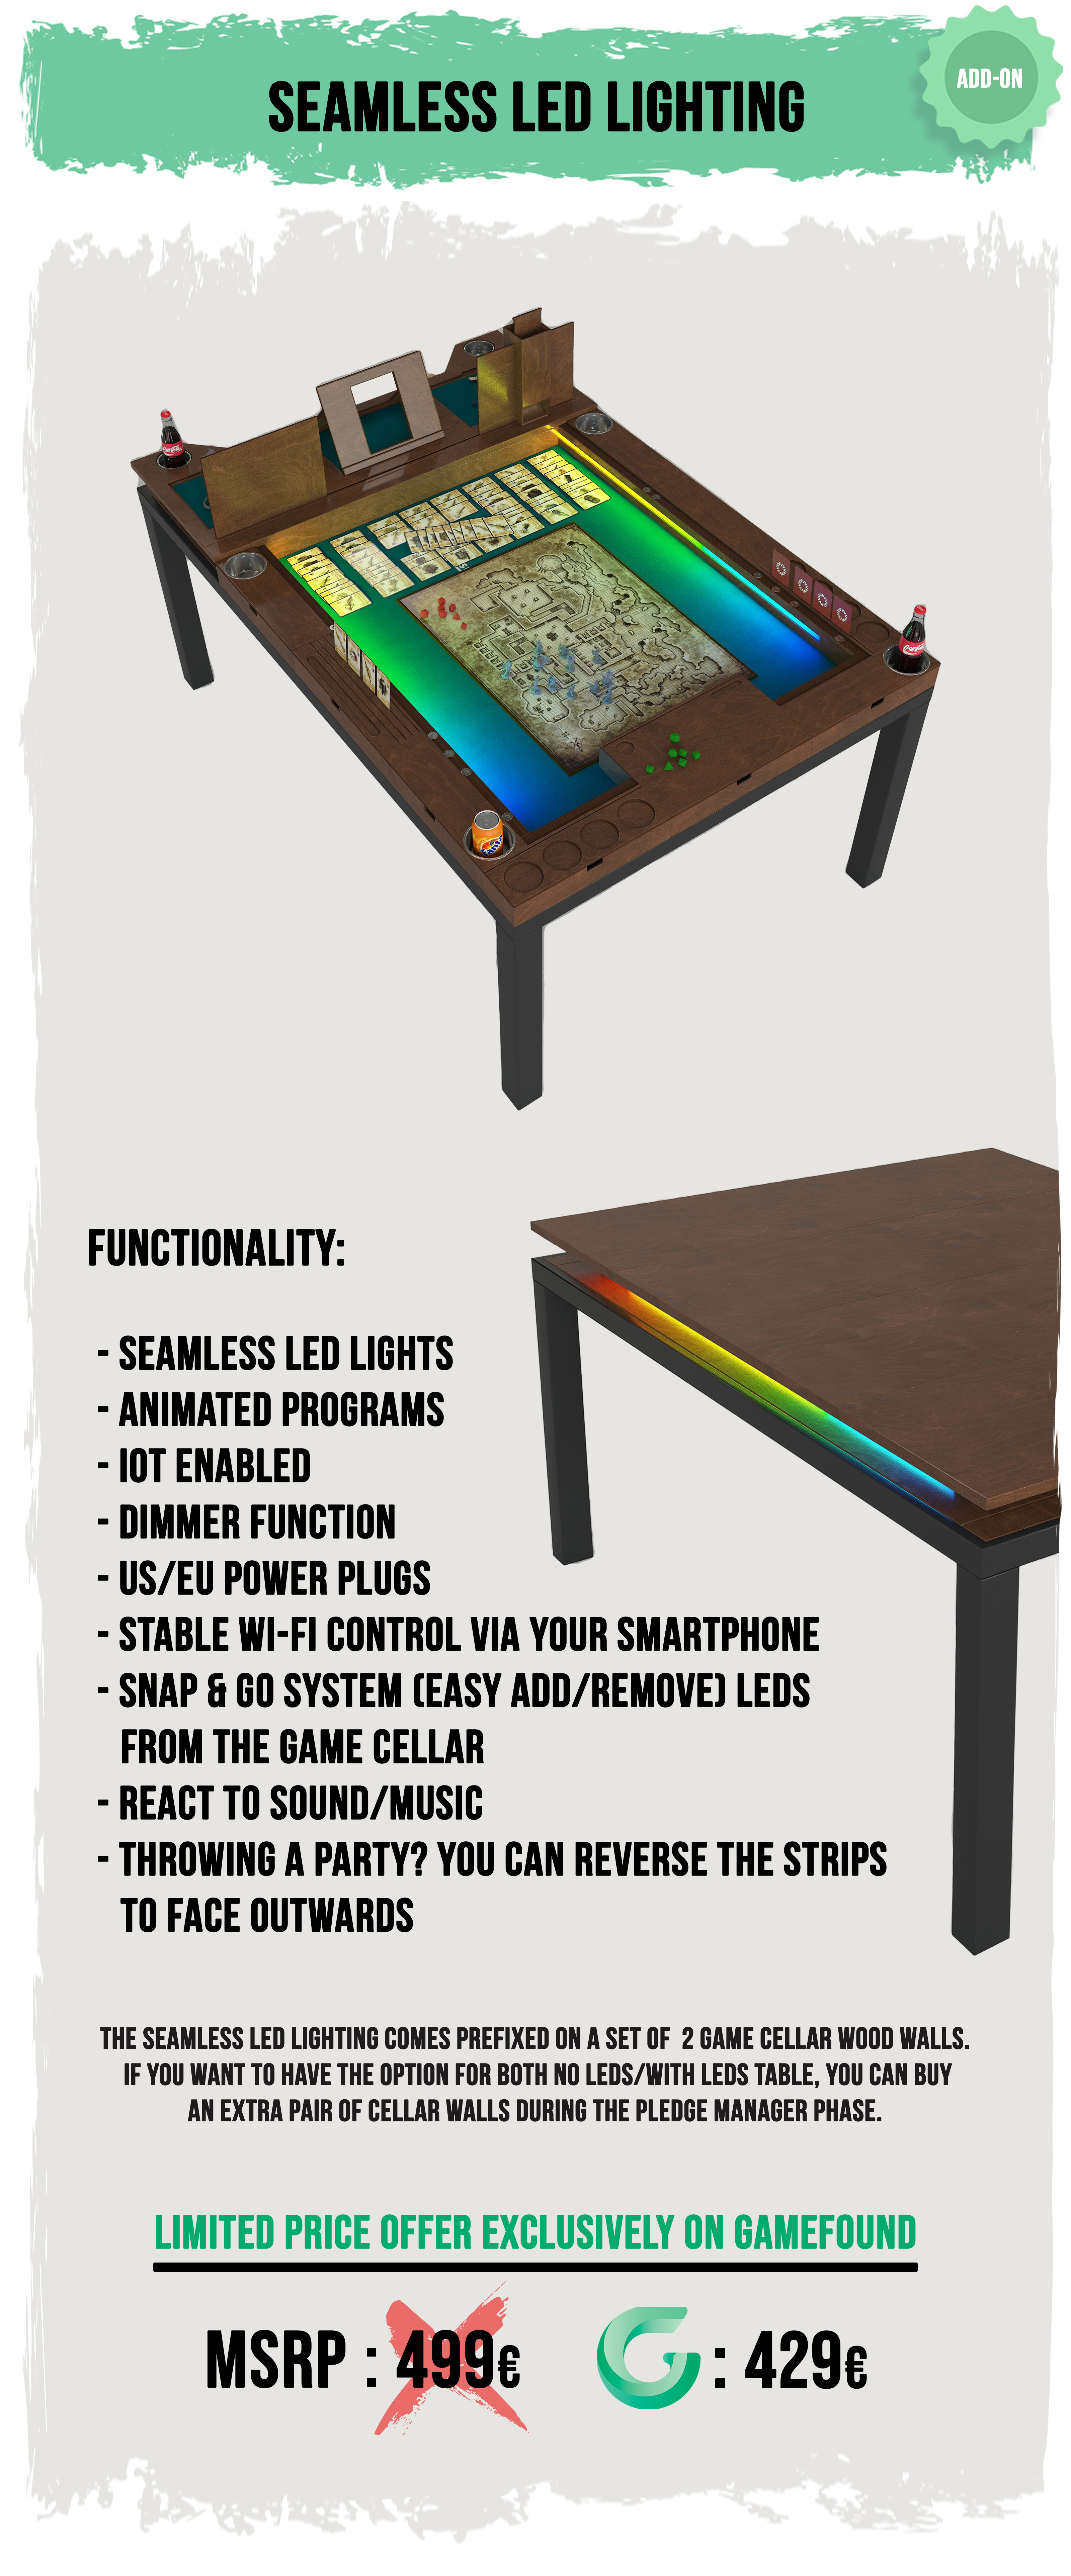 Board game tables - Change your gaming experience